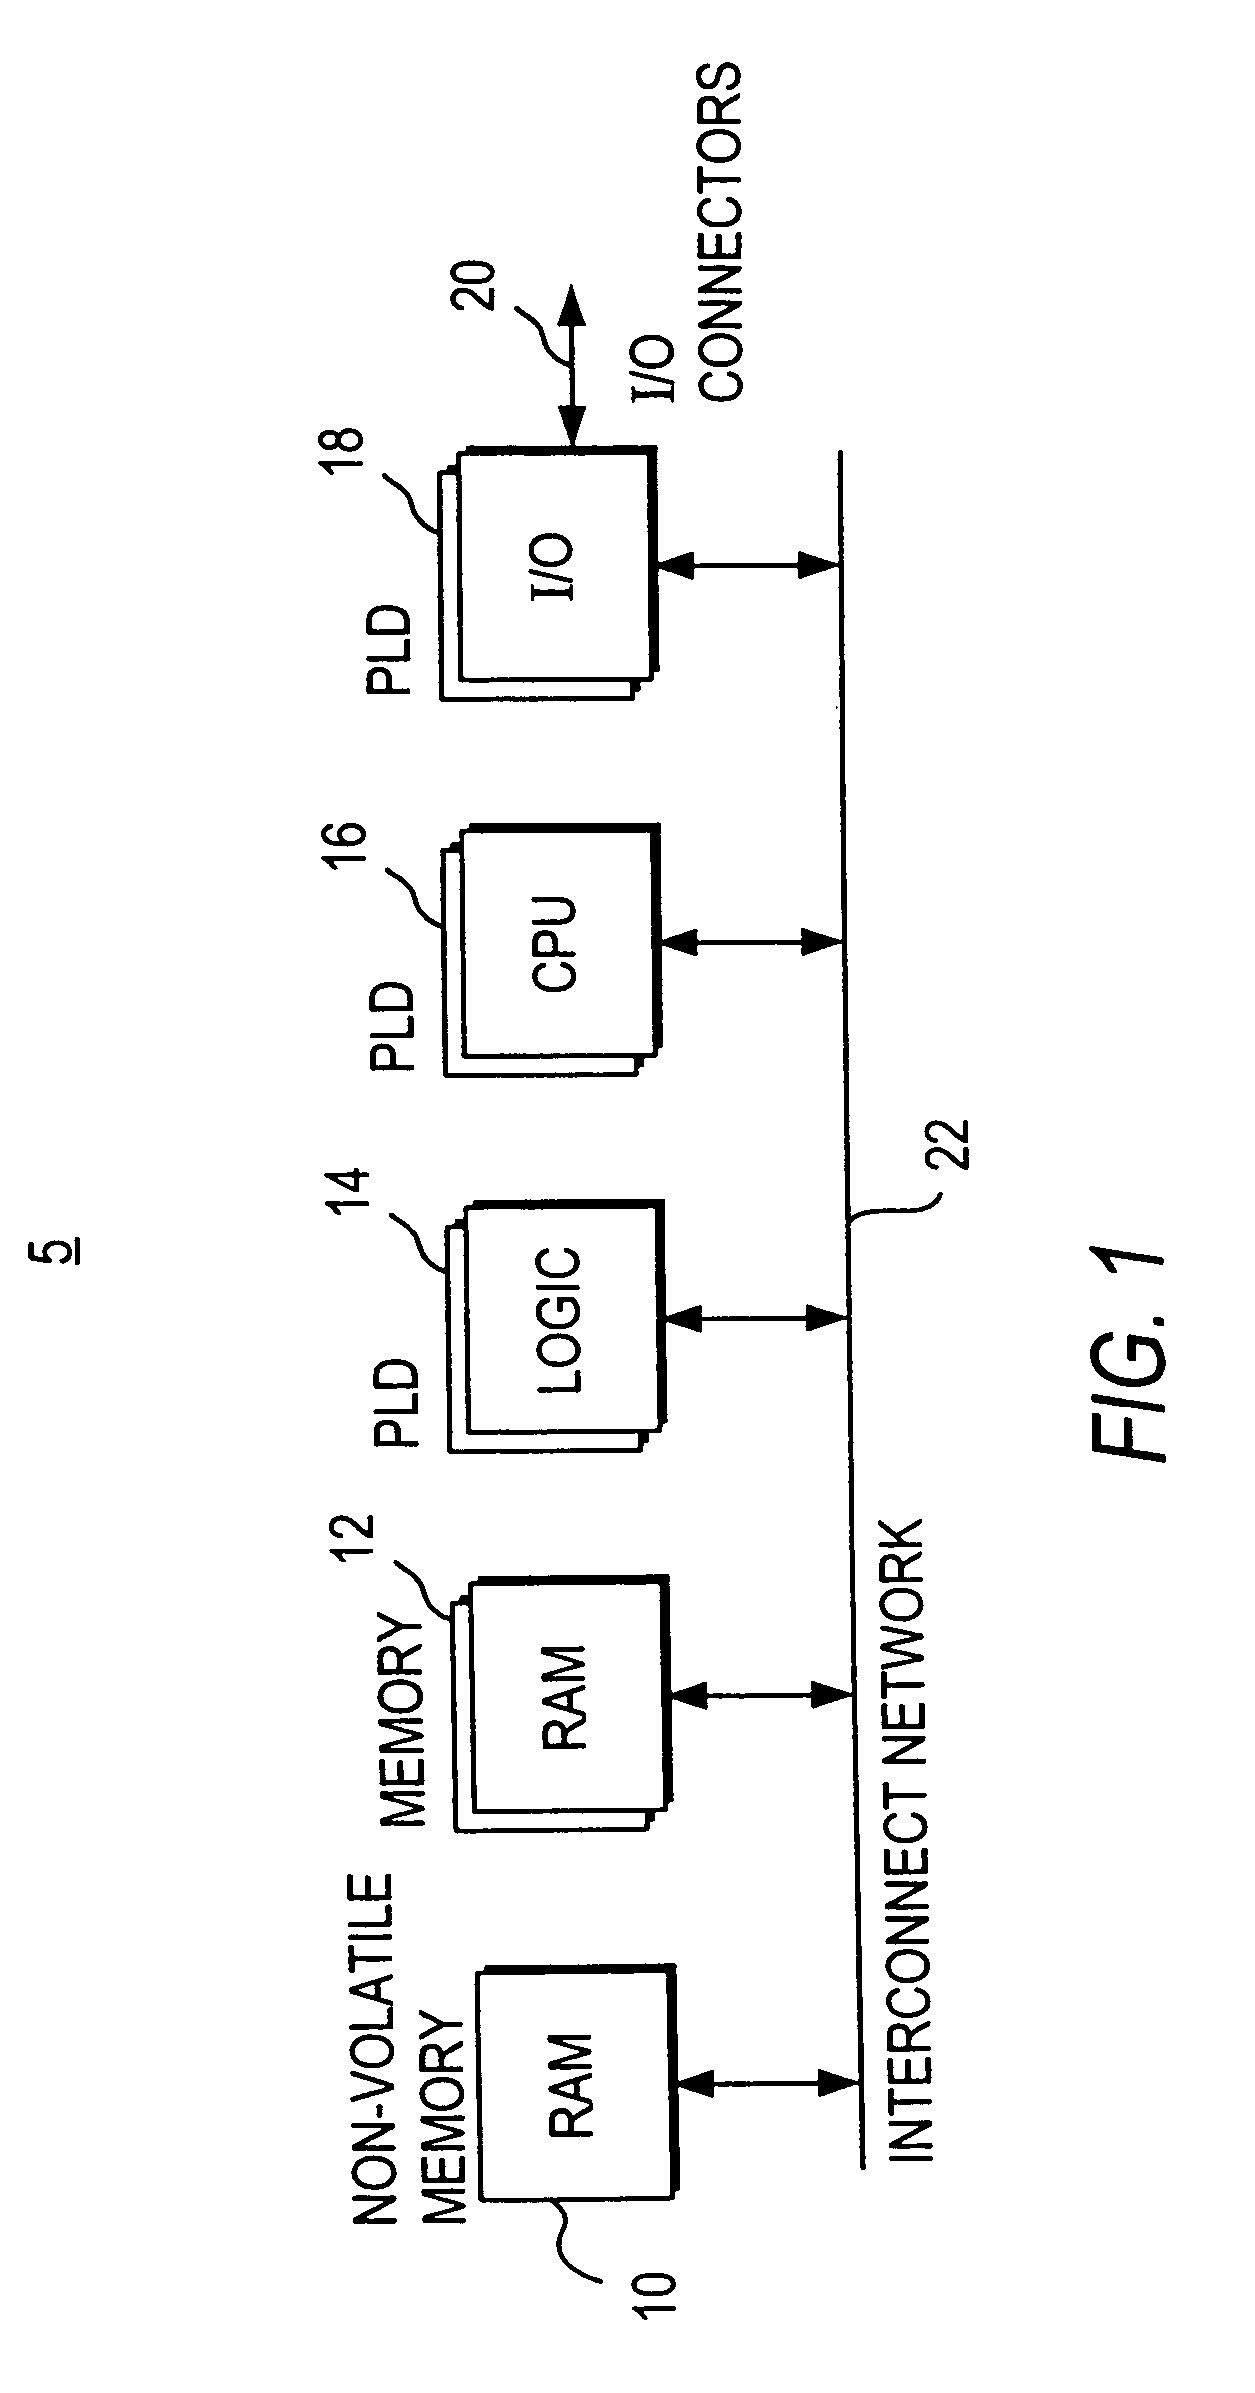 Method for managing resources in a reconfigurable computer having programmable logic resources where automatically swapping configuration data between a secondary storage device and the programmable logic resources